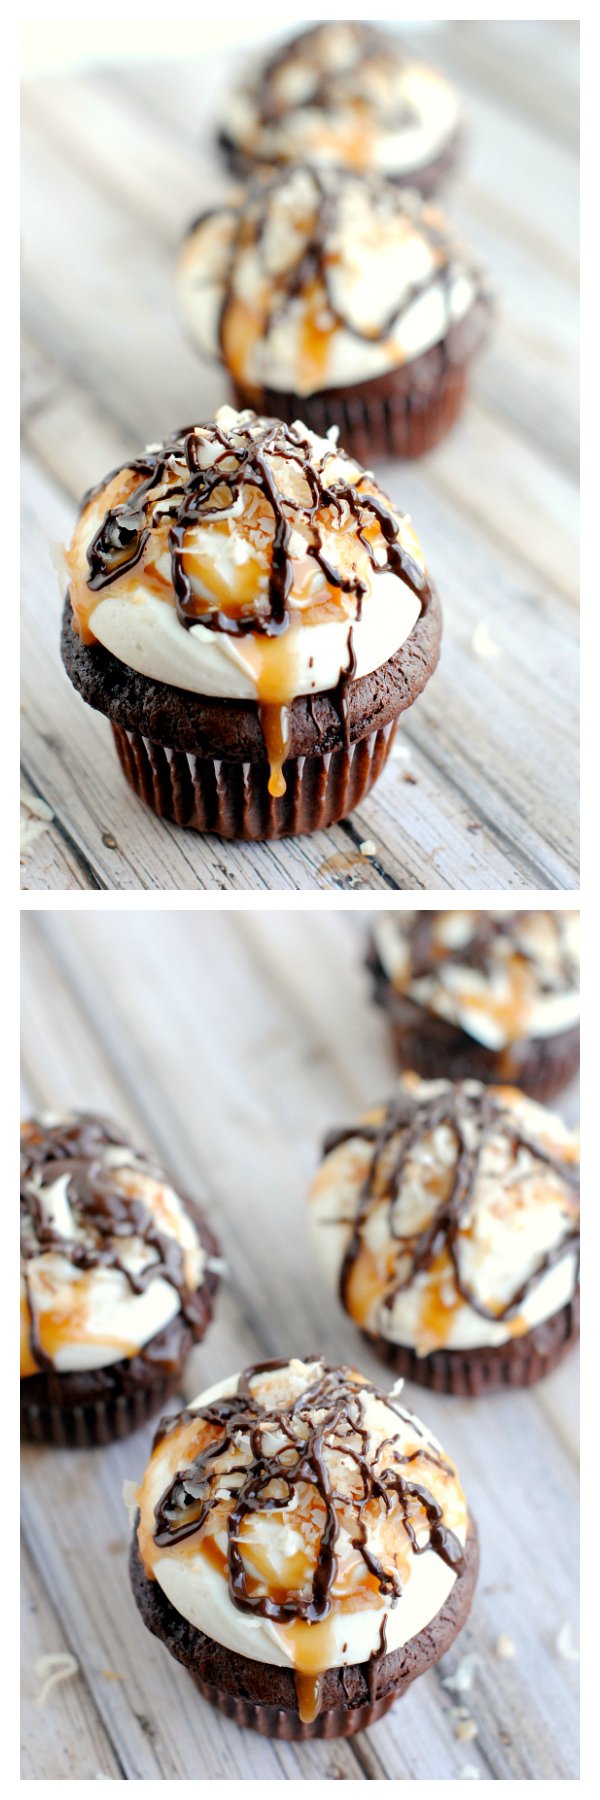 Chocolate Caramel Coconut Cupcakes-like a girl scout cookie in cupcake form, these Samoa cupcakes are amazing! #cupcakes #cupcakerecipe #dessert #girlscoutcookies